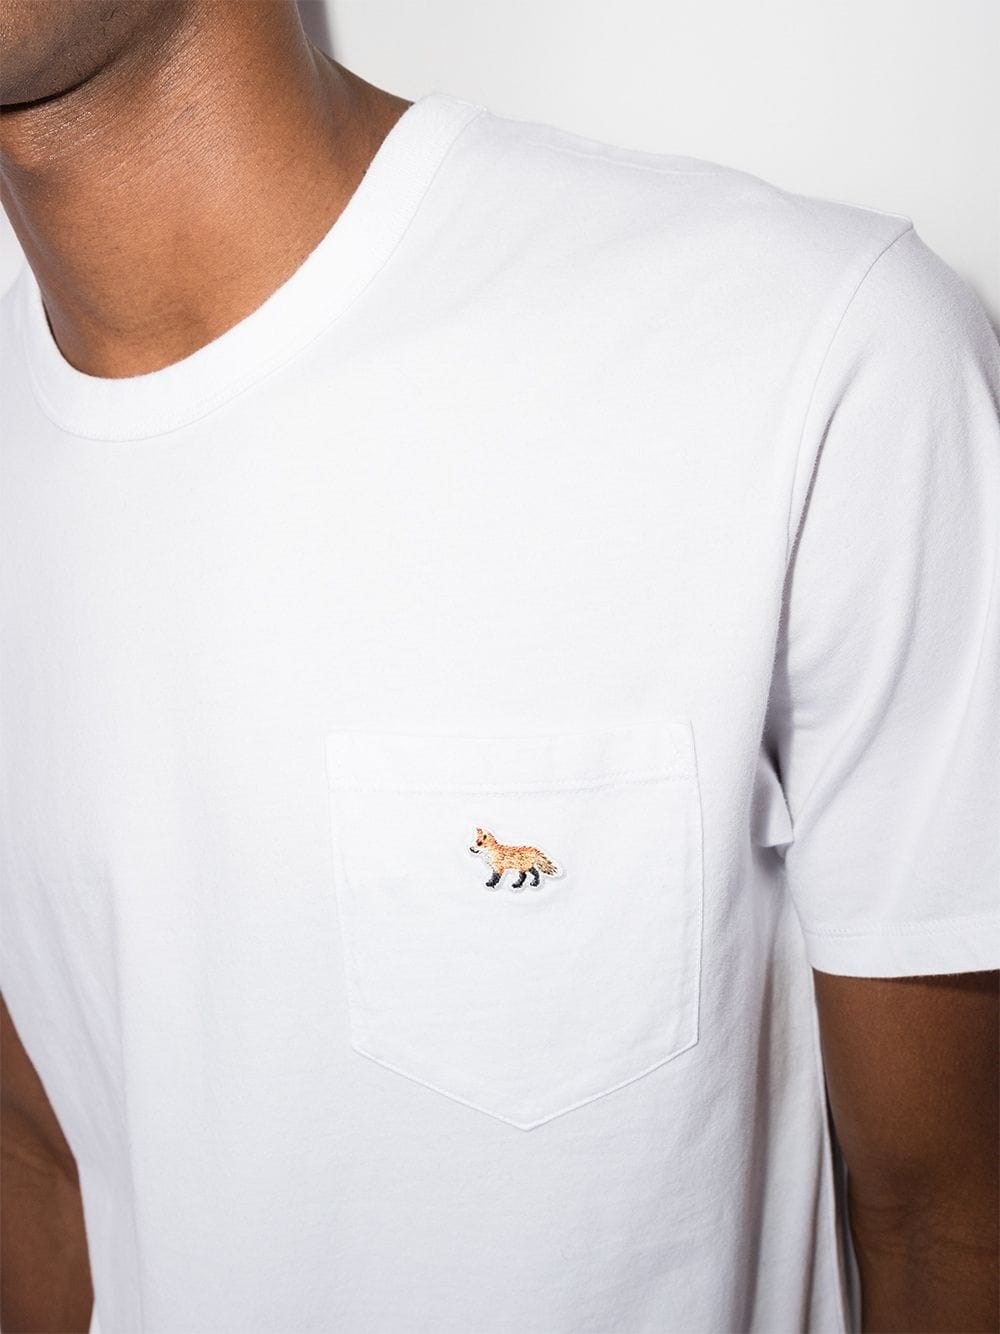 maison kitsune` T-shirt with application available on